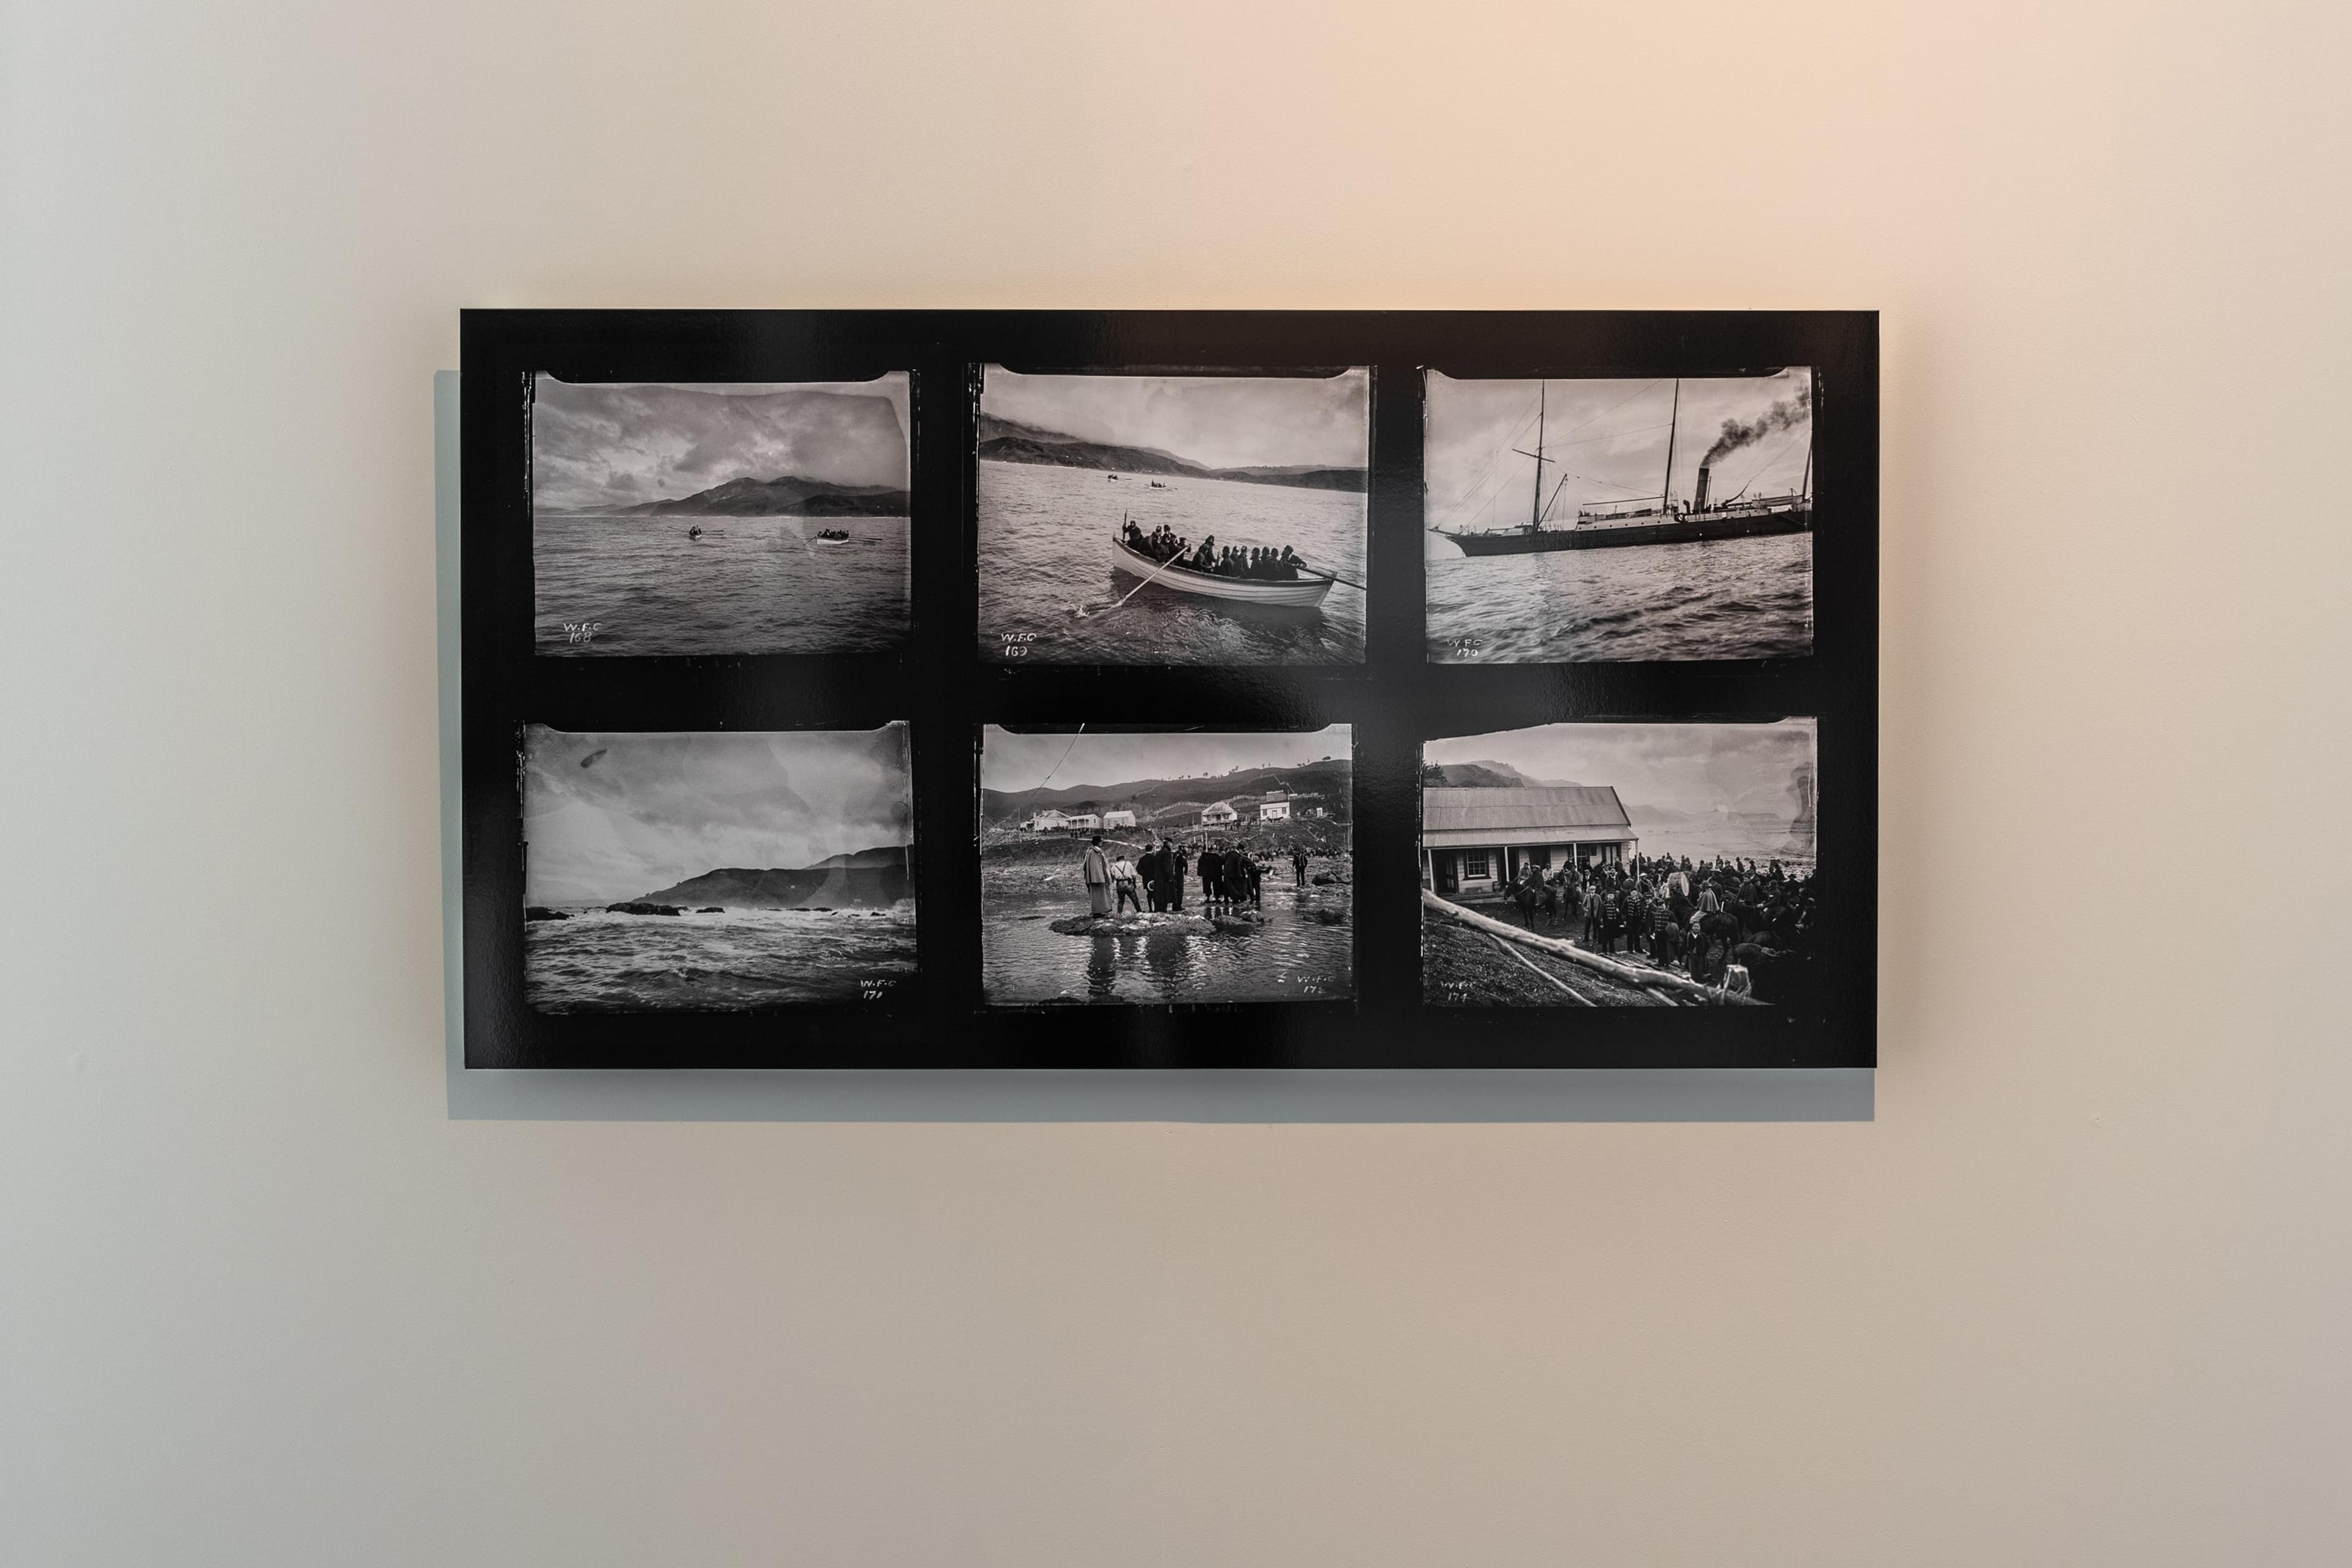 Natalie Robertson, Camera on the deck – the first known photographs of Port Awanui, 1897/2020, inkjet print, silver gloss paper, reprinted from the original glass plate negative by William Fitzgerald Crawford (1844–1915), courtesy of the artist and Tairāwhiti Museum, Gisborne. Installation view, Tēnei Ao Tūroa – This Enduring World, Te Pātaka Toi Adam Art Gallery, Victoria University Wellington. Photo: Ted Whitaker